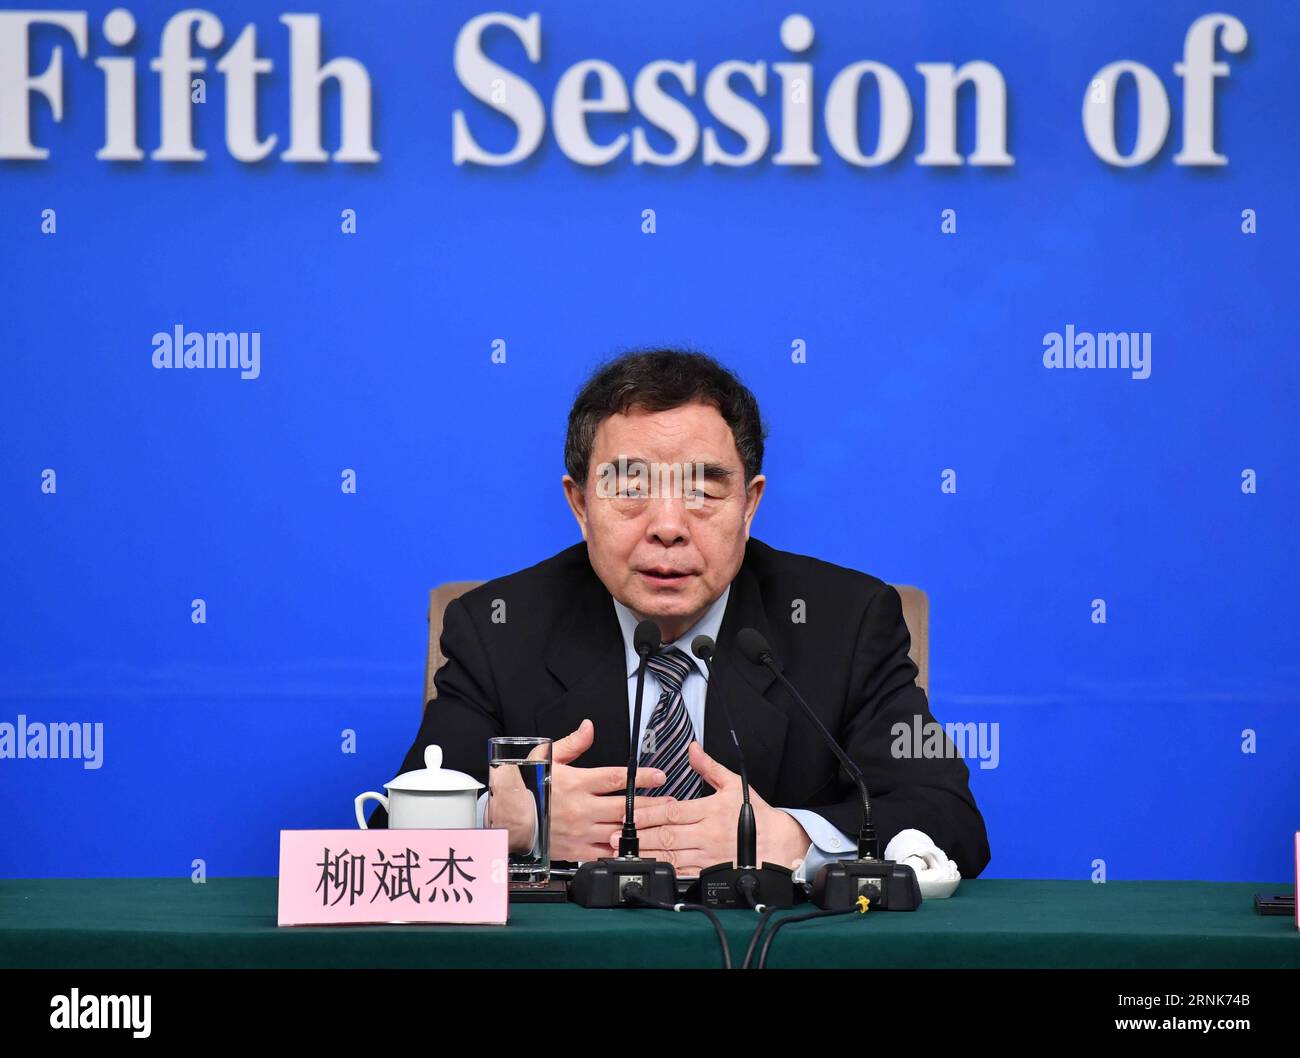 (170310) -- BEIJING, March 10, 2017 -- Liu Binjie, chairman of the Education, Science, Culture and Public Health Committee of the National People?s Congress (NPC), answers questions on the NPC s supervisory work at a press conference for the fifth session of the 12th NPC in Beijing, capital of China, March 10, 2017. ) (zhs) (TWO SESSIONS)CHINA-BEIJING-NPC-PRESS CONFERENCE-SUPERVISORY WORK (CN) LixXin PUBLICATIONxNOTxINxCHN   Beijing March 10 2017 Liu Binjie Chairman of The Education Science Culture and Public Health Committee of The National Celebrities S Congress NPC Answers Questions ON The Stock Photo